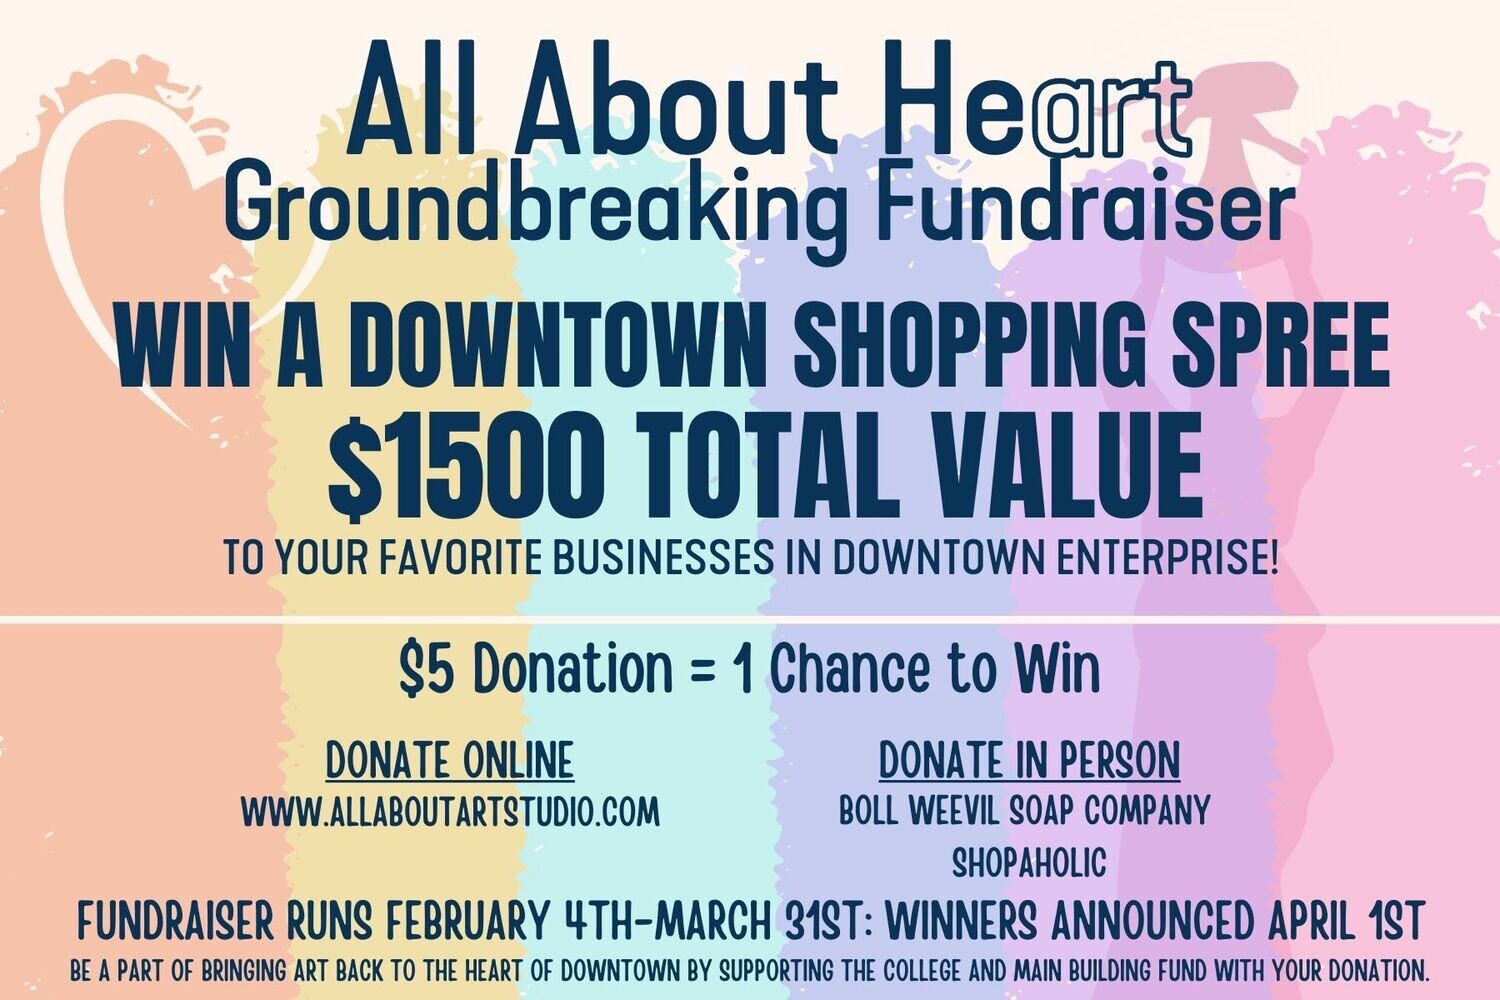 Donate for your chance to Win a Downtown Shopping Spree! Buy As Many Chances To Win As You Would Like! ❤️